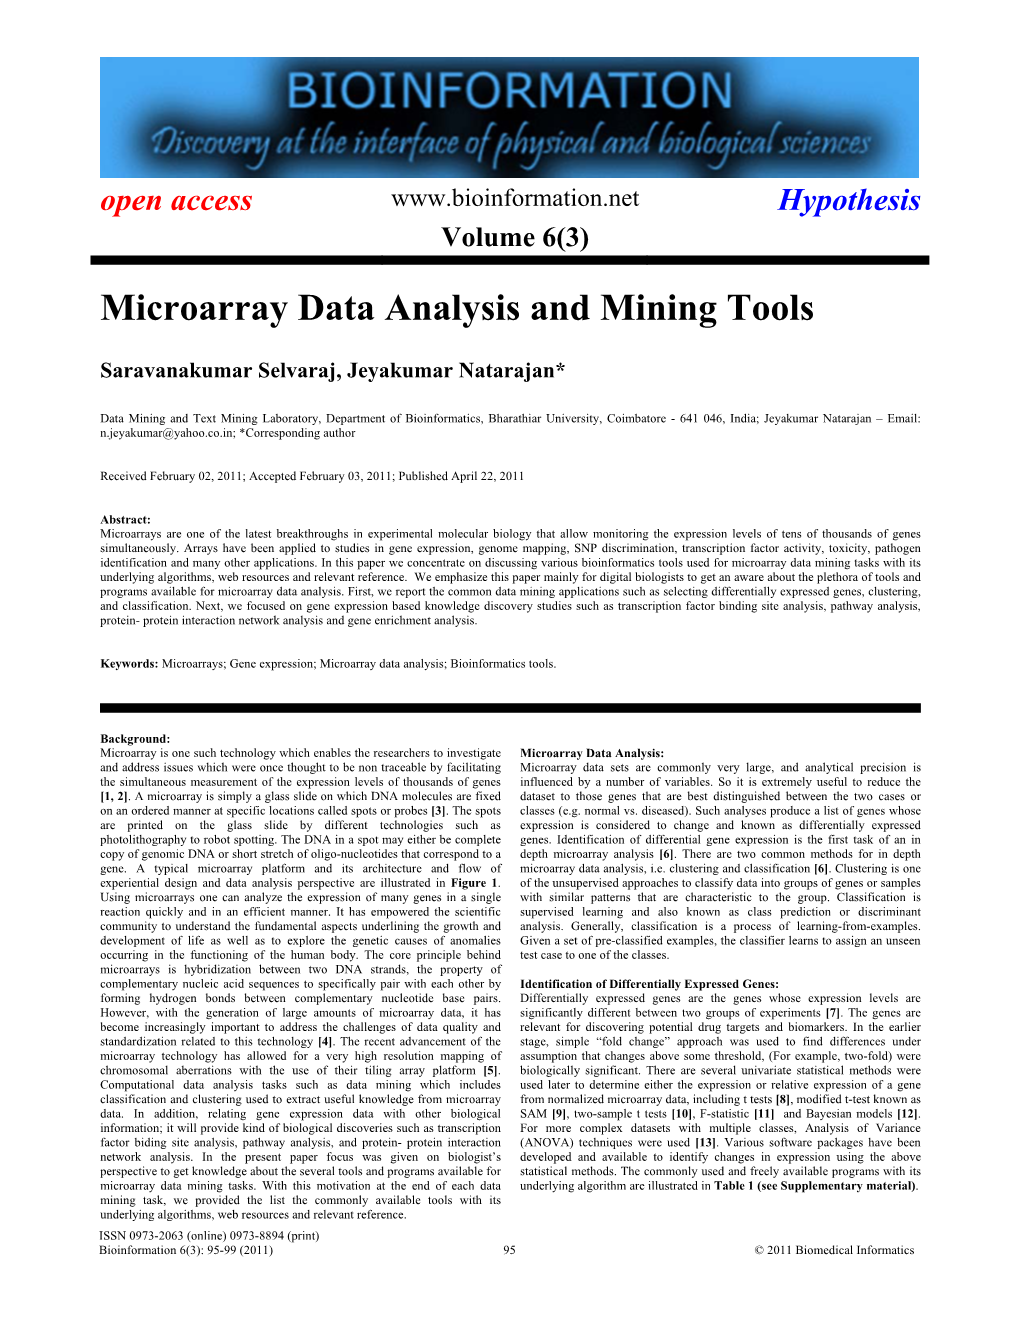 Microarray Data Analysis and Mining Tools